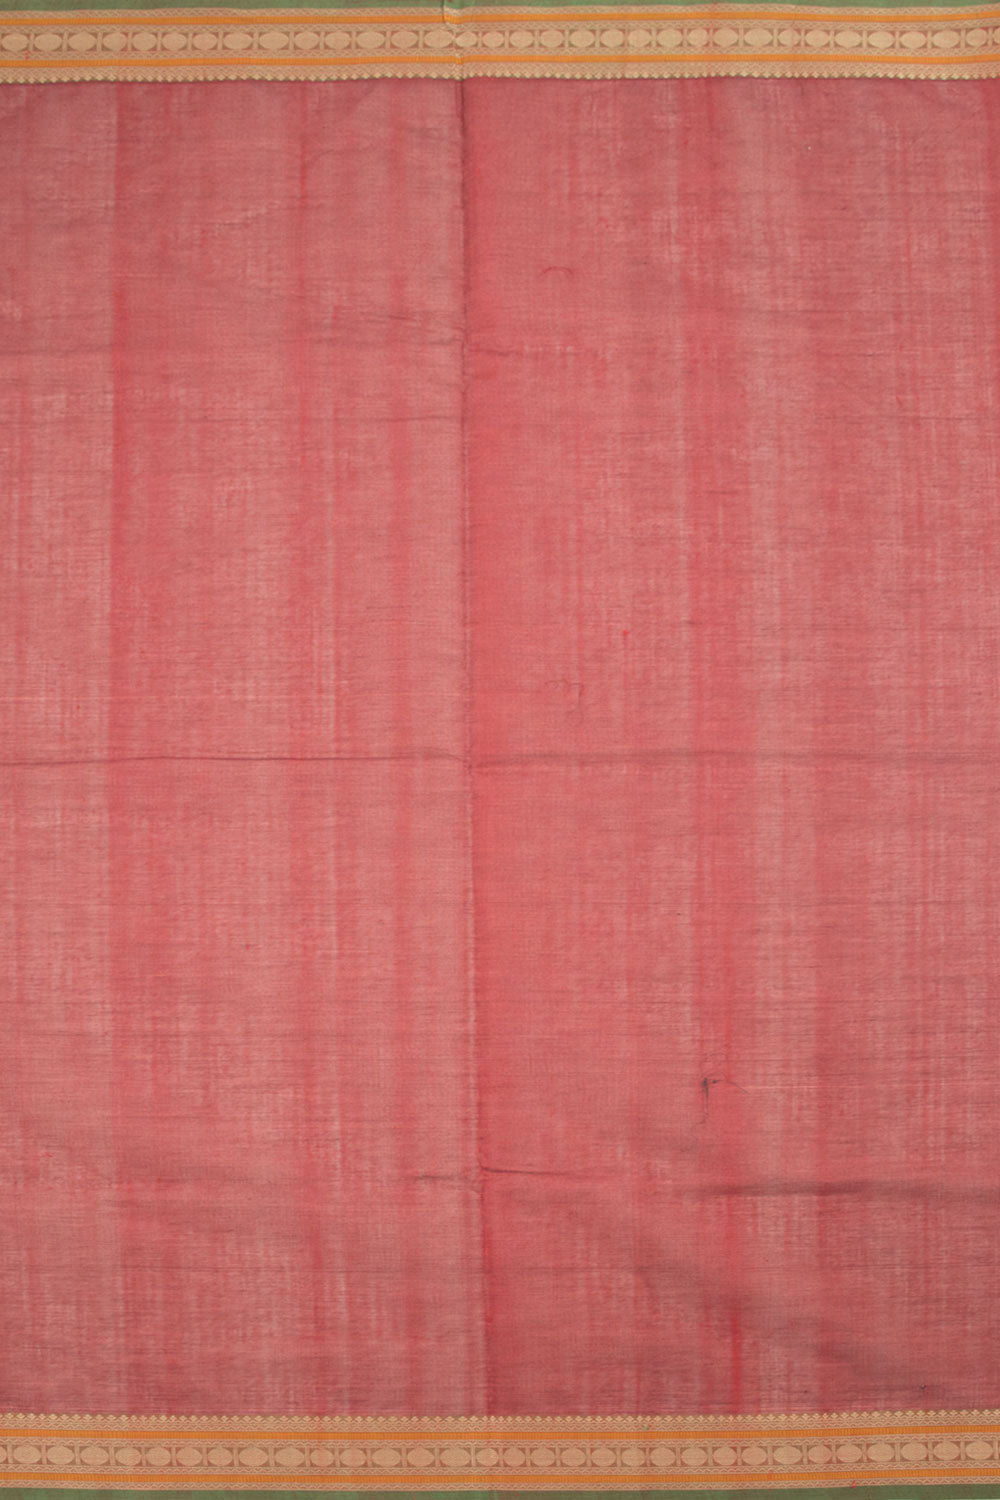 Currant Red Handwoven Kanchi Cotton Saree 10059970